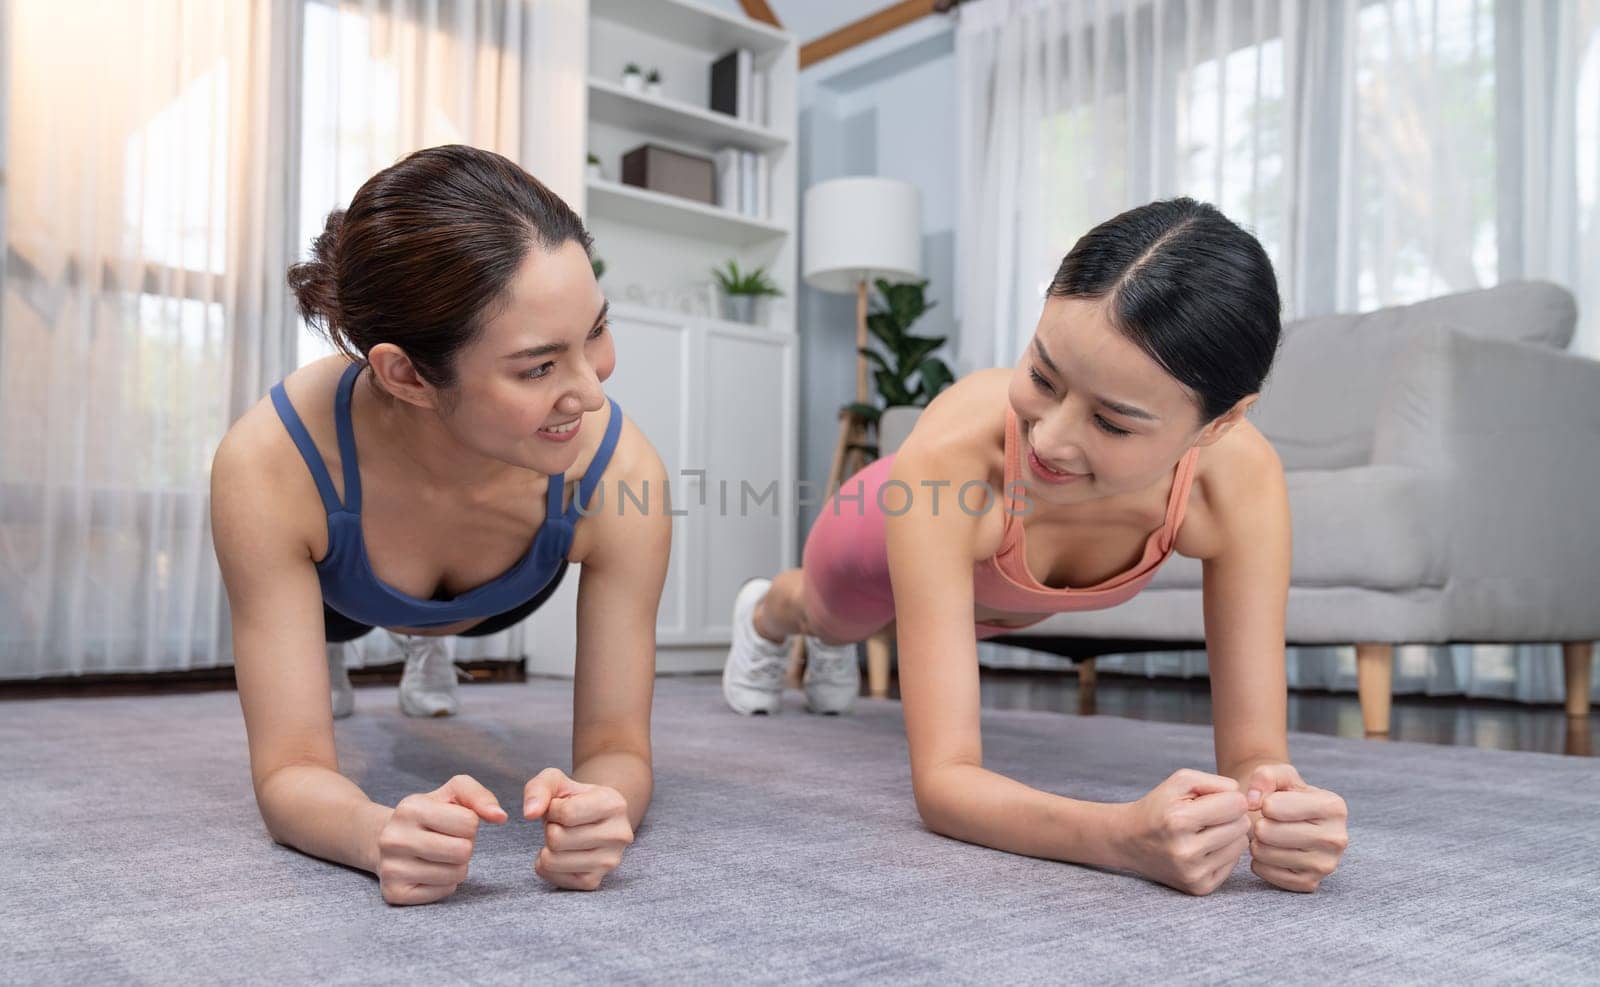 Fit young asian woman planing on the living room floor with her trainer or exercise buddy. Healthy lifestyle workout training routine at home. Balance and endurance exercising concept. Vigorous